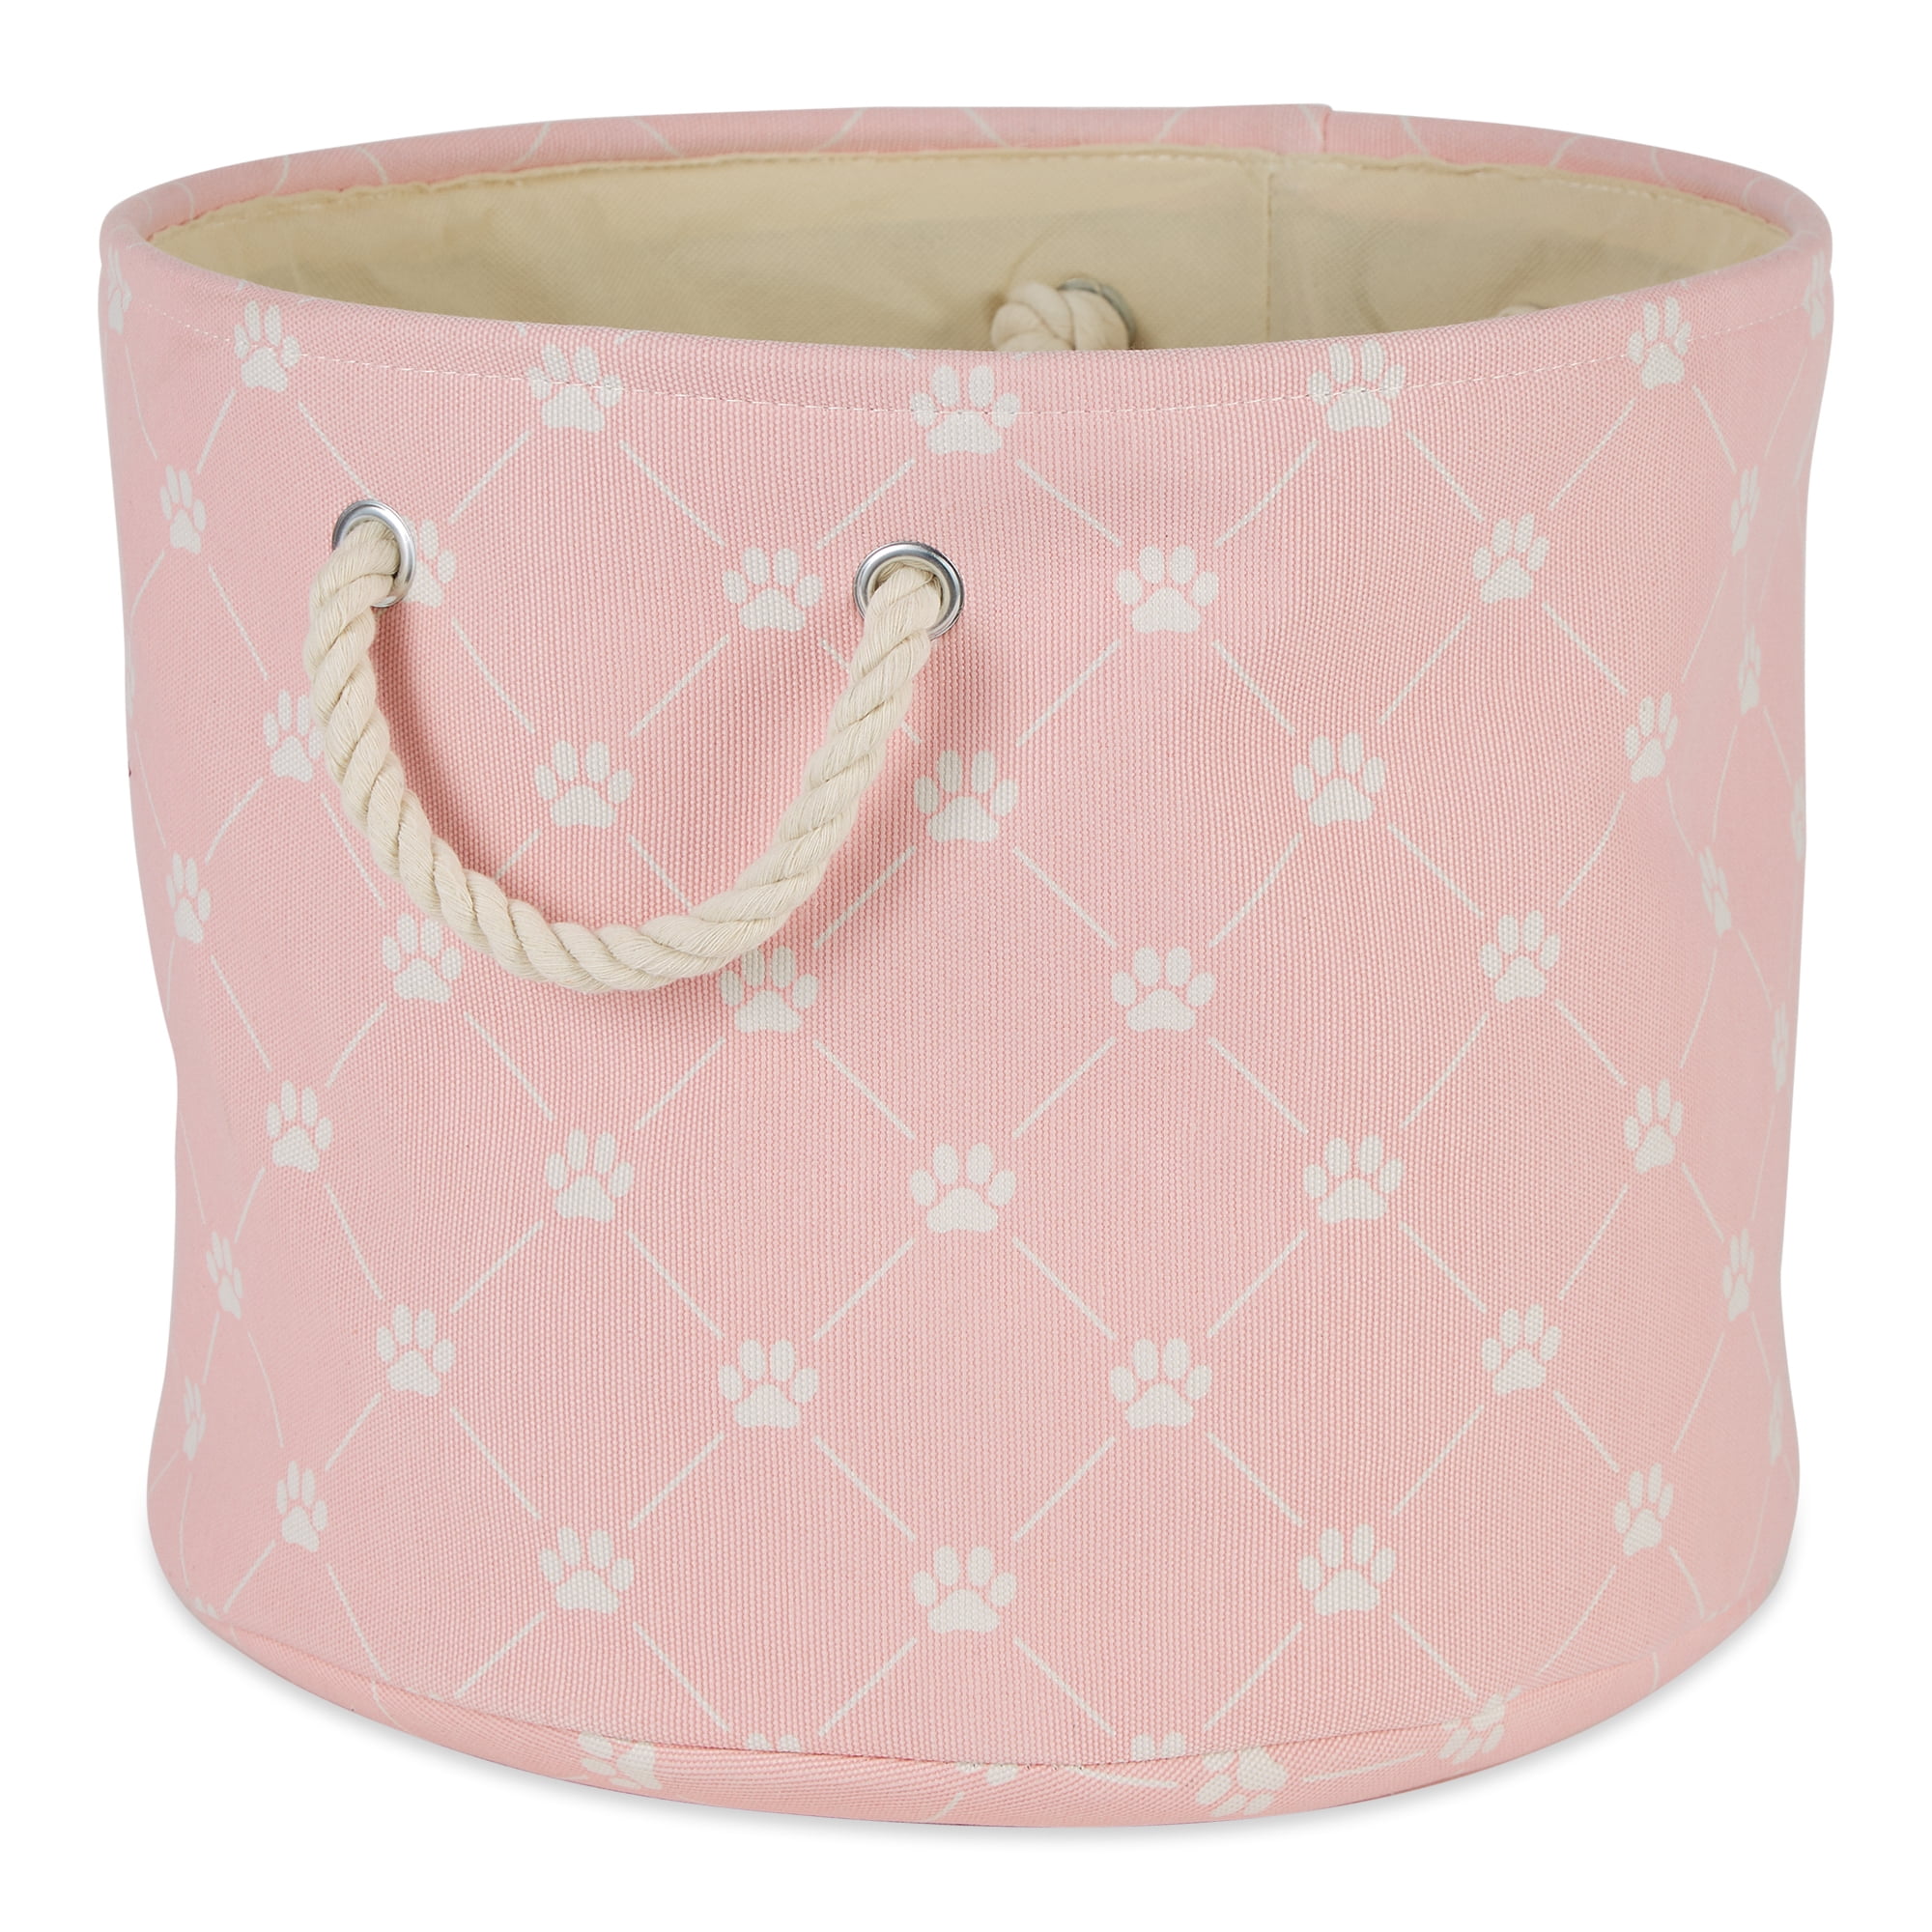 Picture of Design Imports CAMZ14256 Polyester Trellis Paw Round Pet Bin, Pink - Small